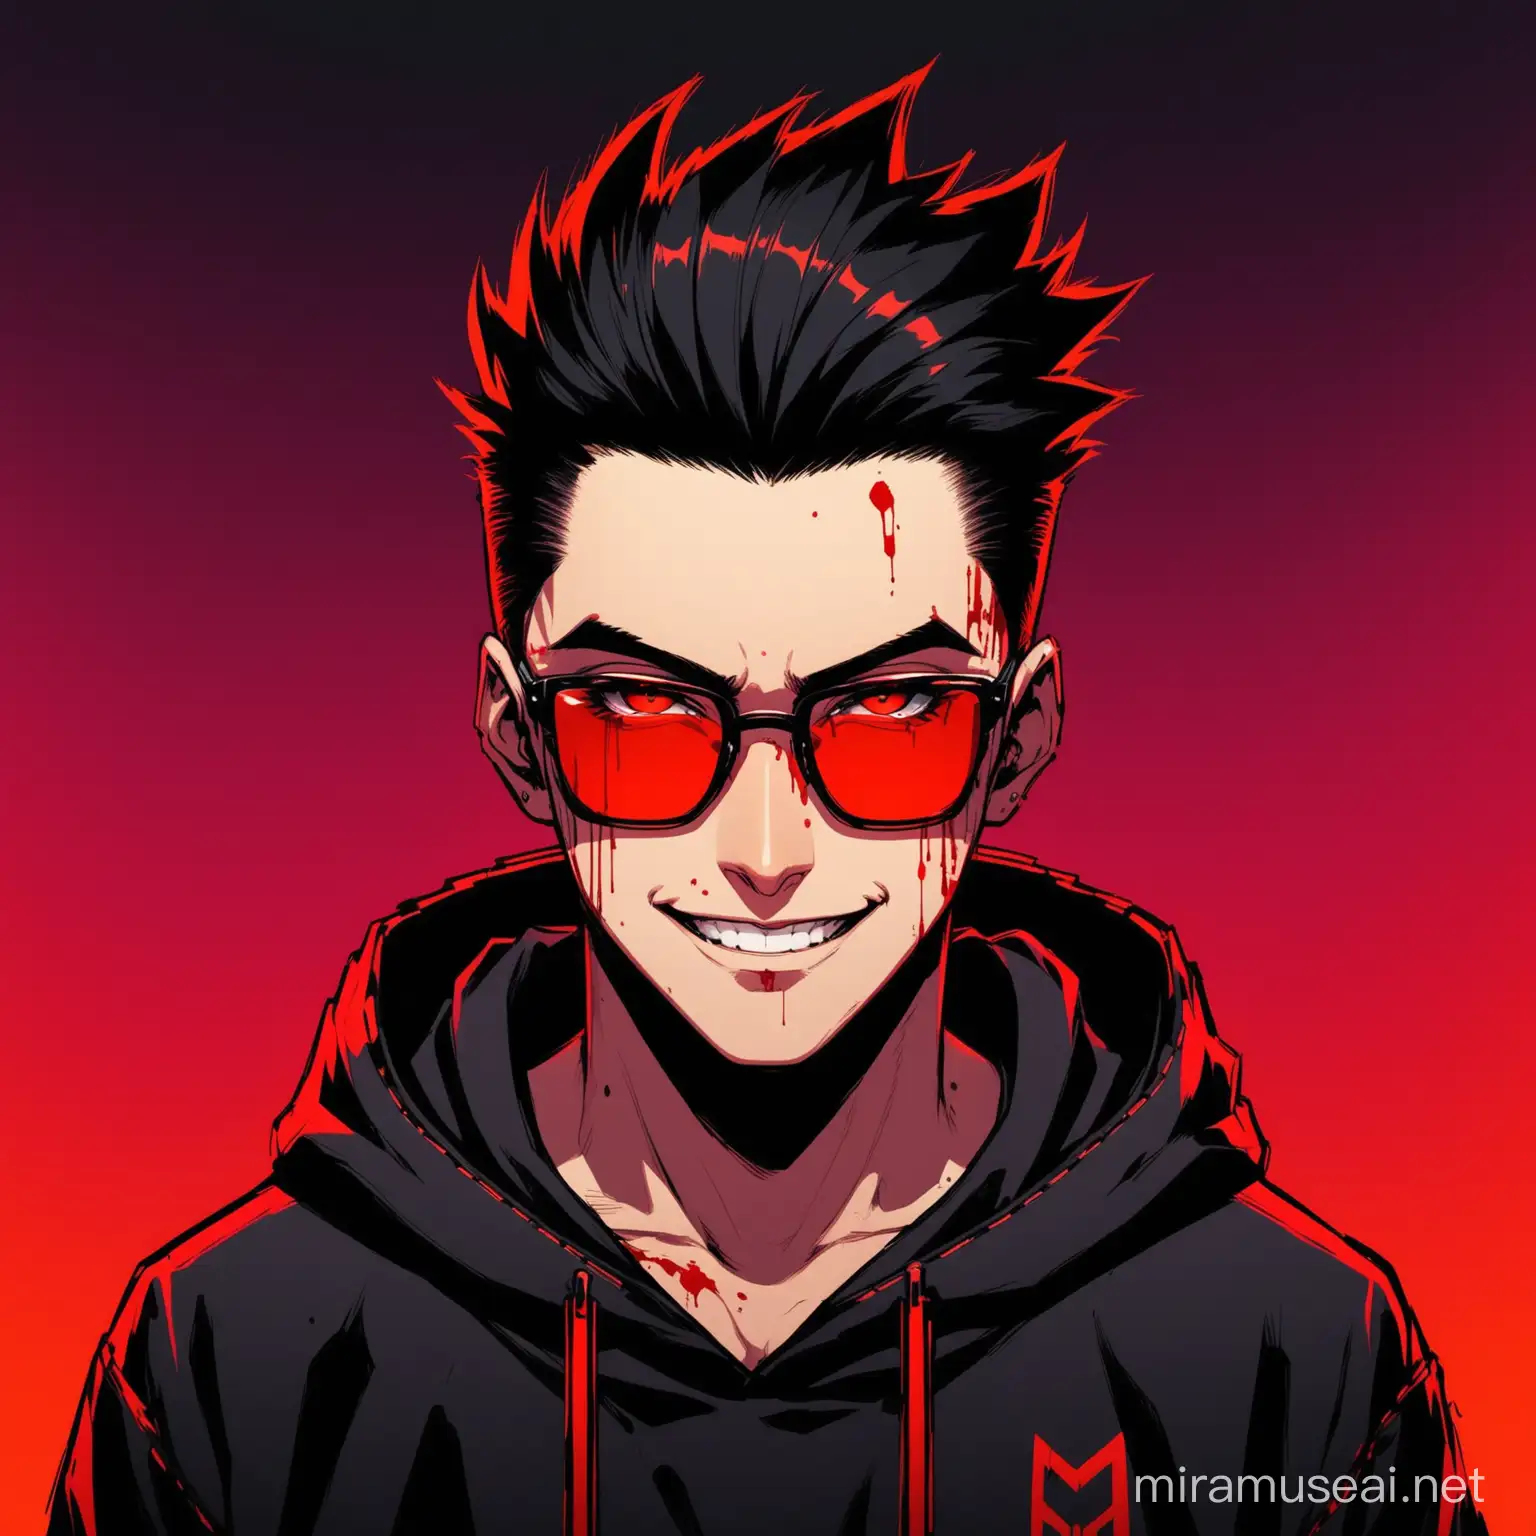 cool,hacker,cyberpunk hoodie,glasses,quiff hairs,oblong face,big nose,small mouth,m shape hairline,handsome,aesthetic,psycho smile,gradient background,blood on face,red eyes
